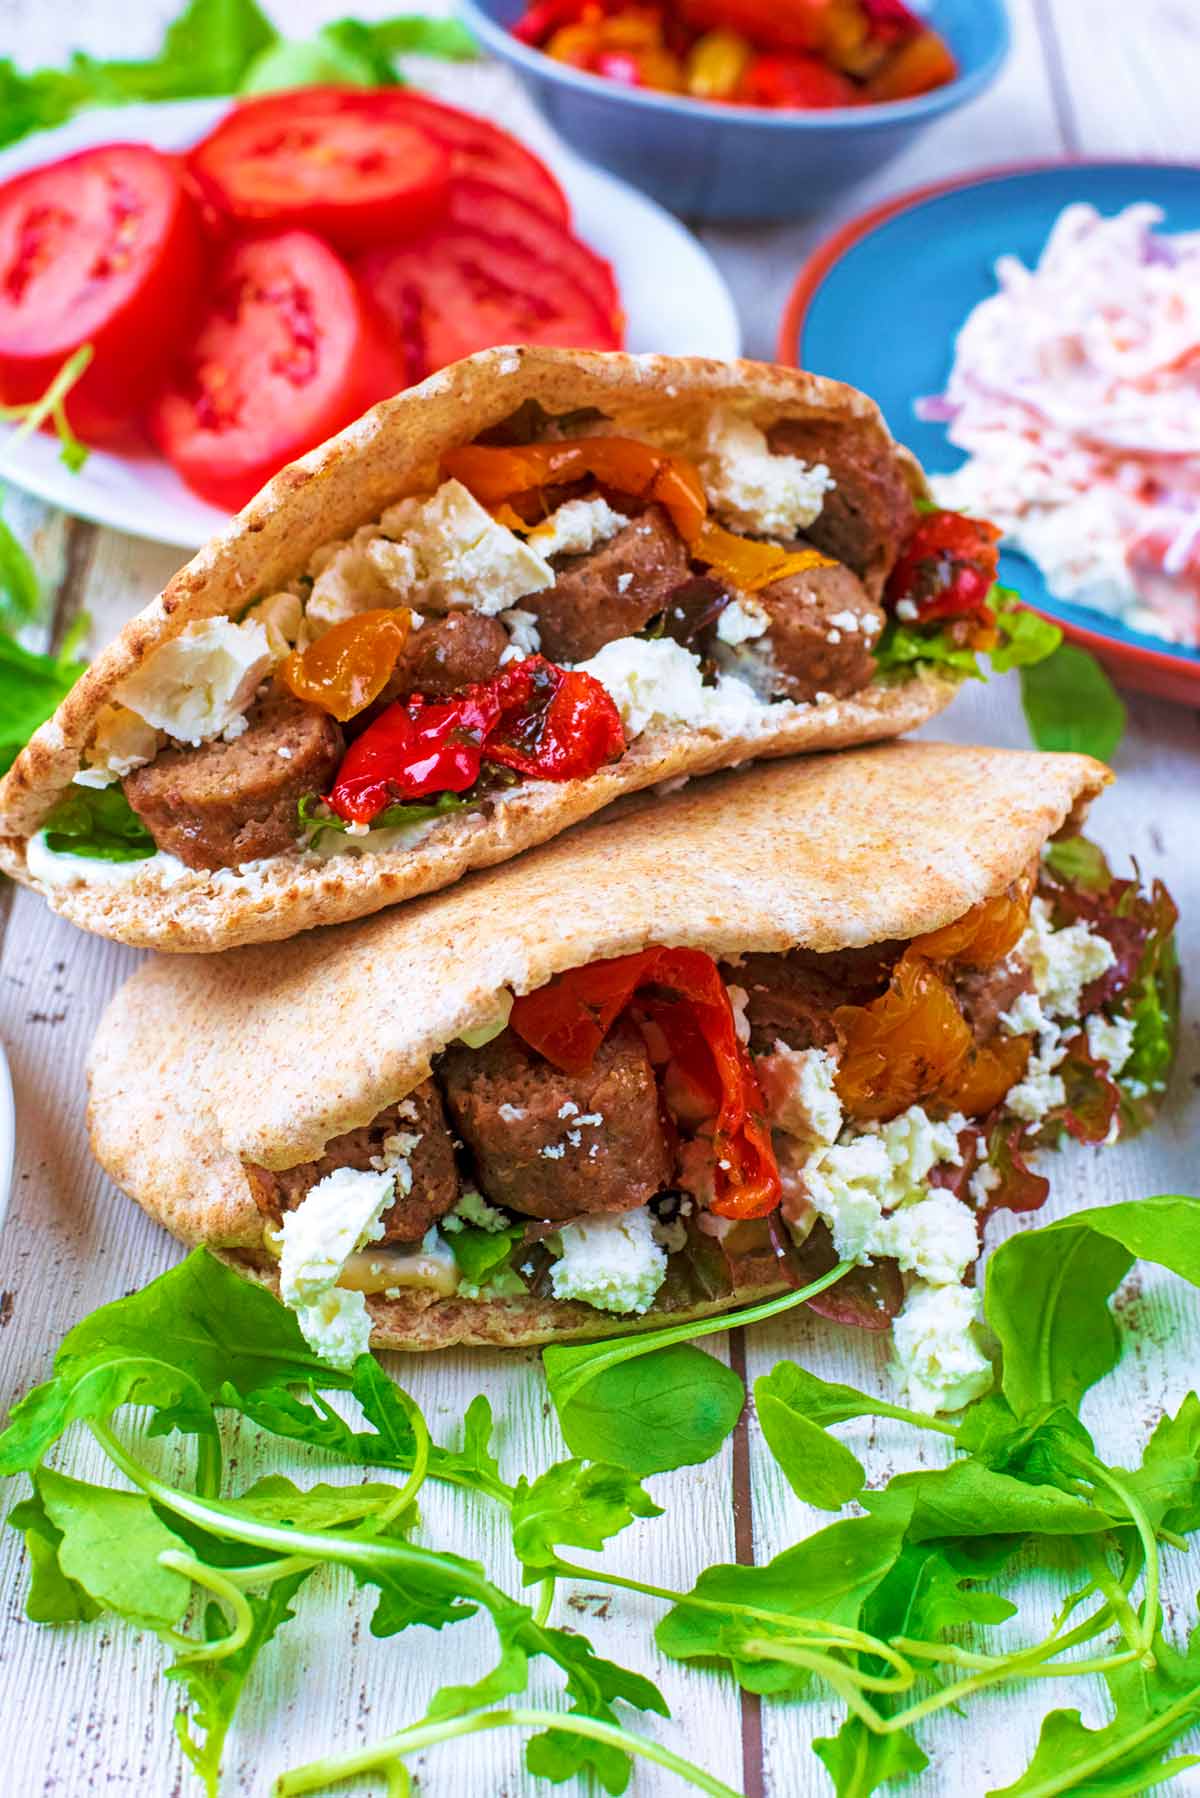 Two open pita breads stuffed with lamb and salad.